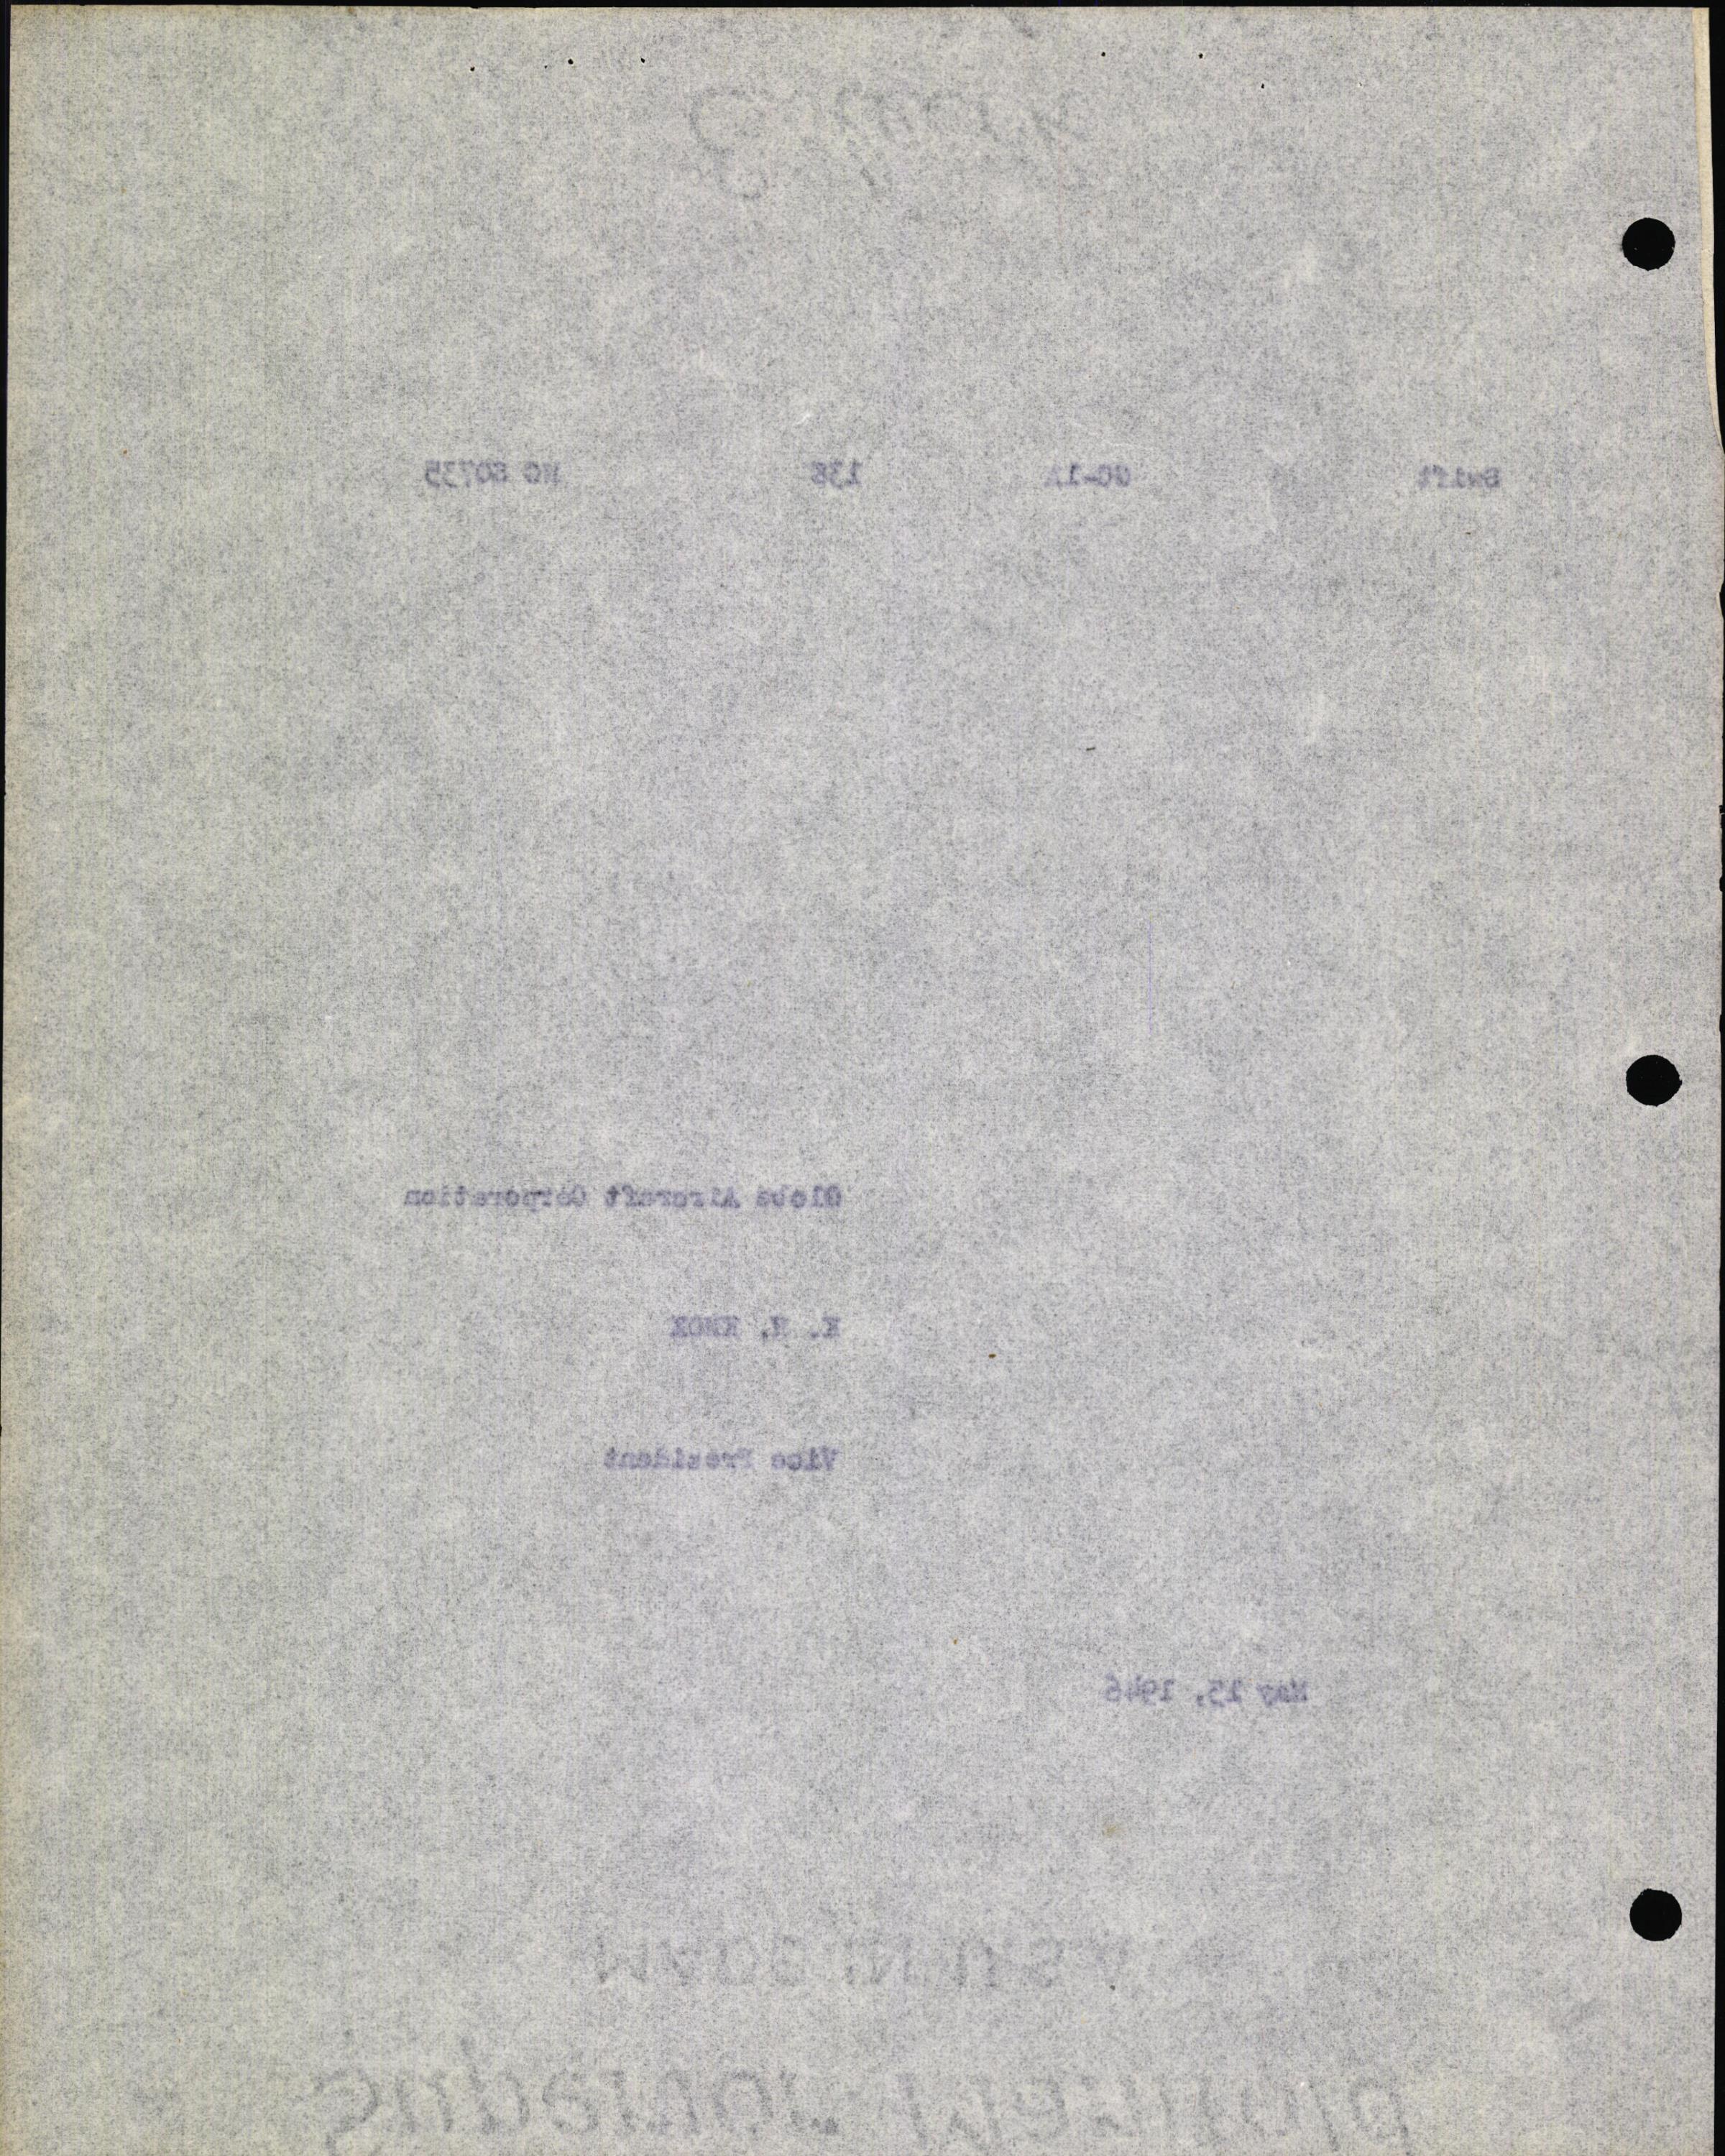 Sample page 6 from AirCorps Library document: Technical Information for Serial Number 138